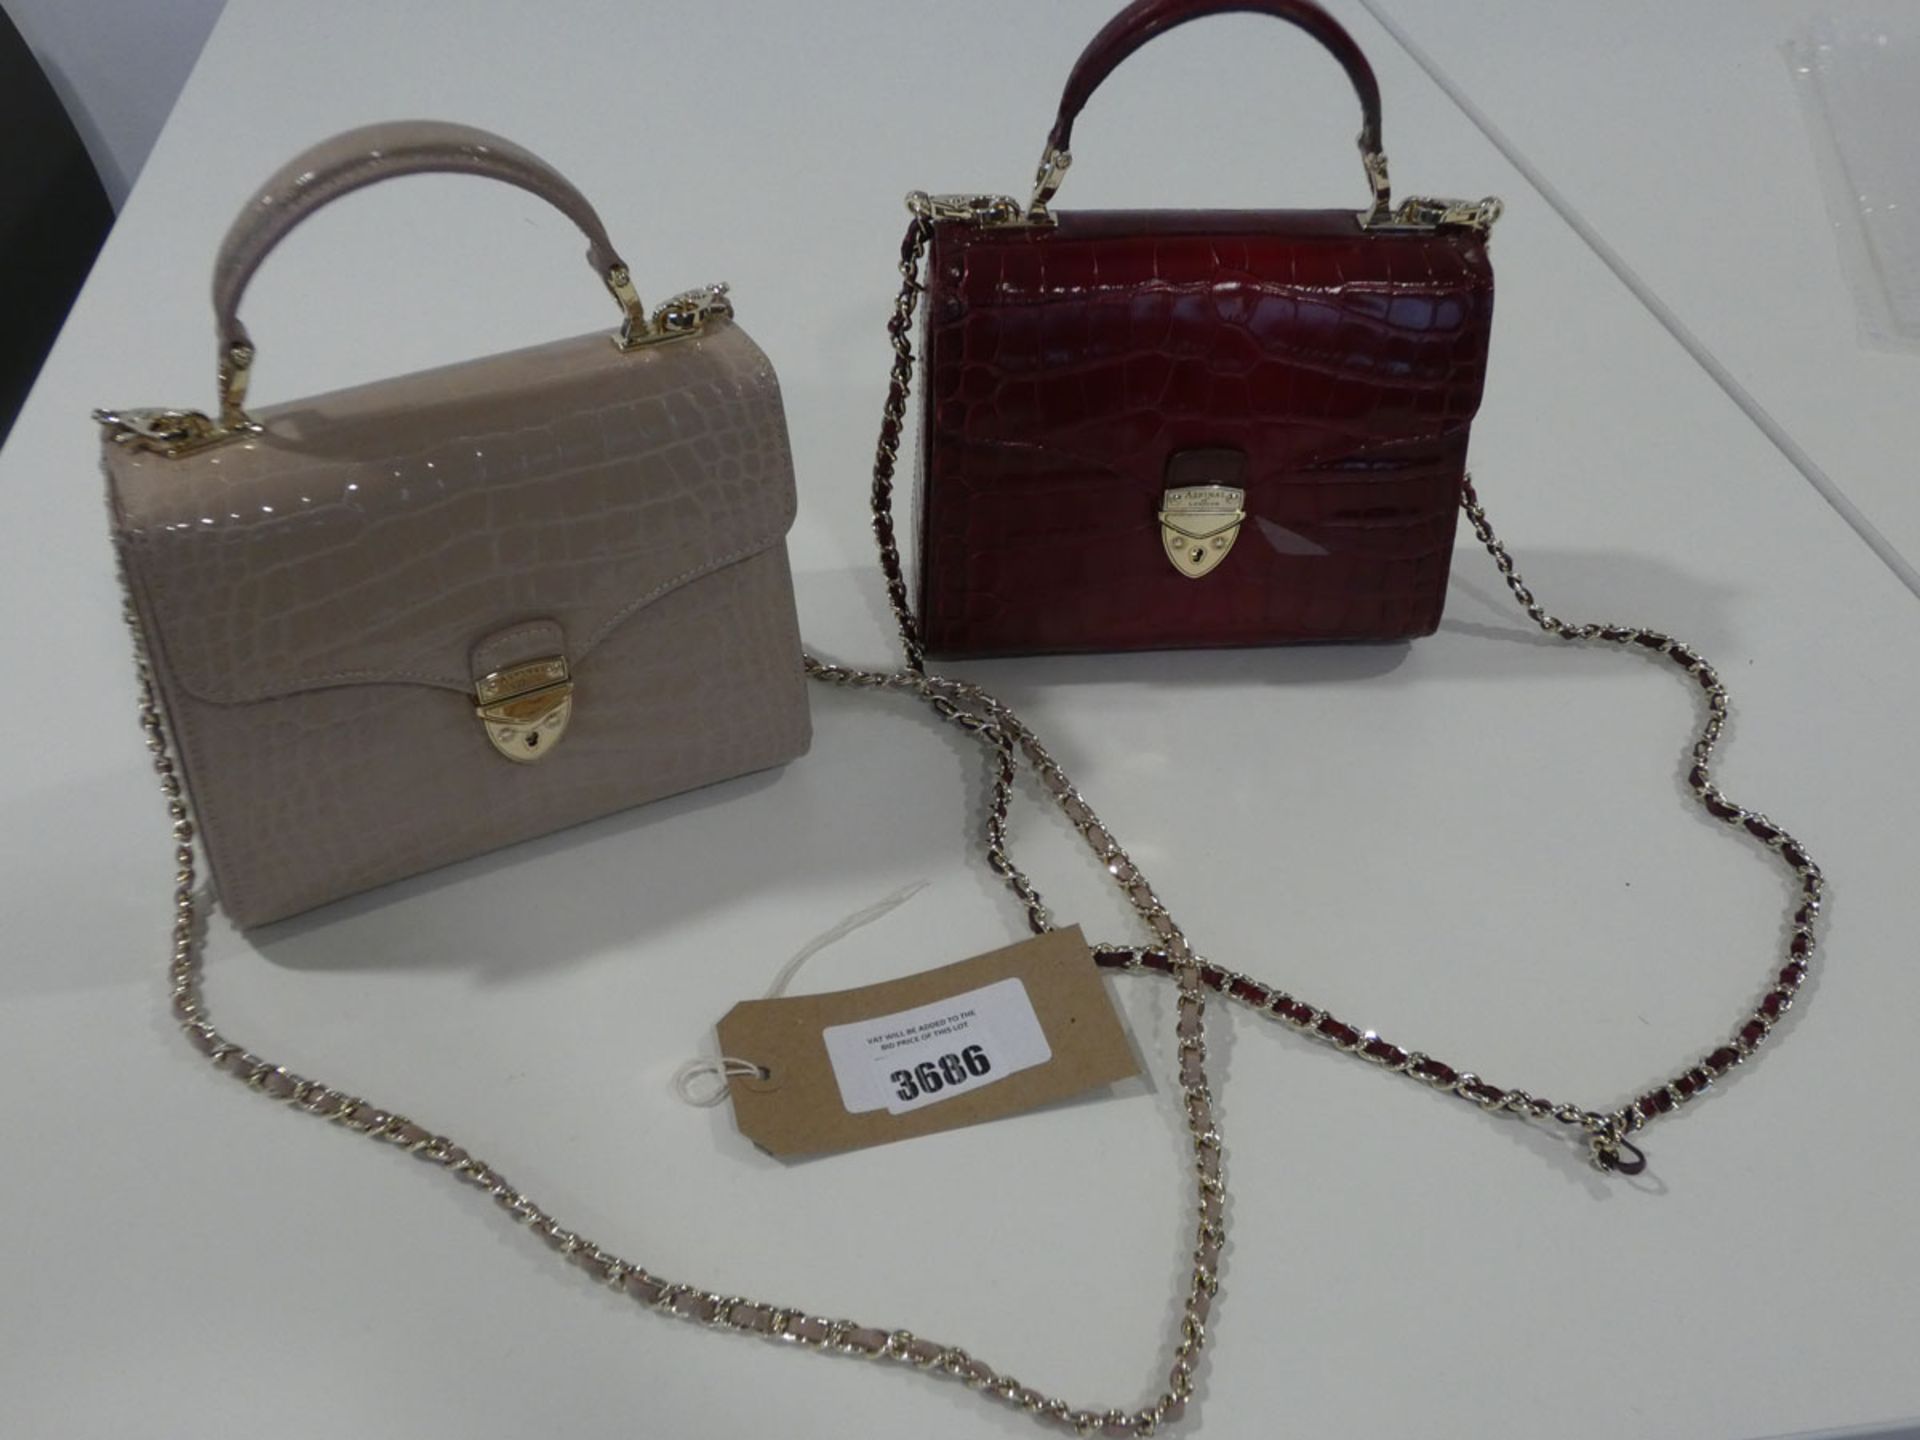 Aspinal of London Midi Mock Croc Bag in beige and red